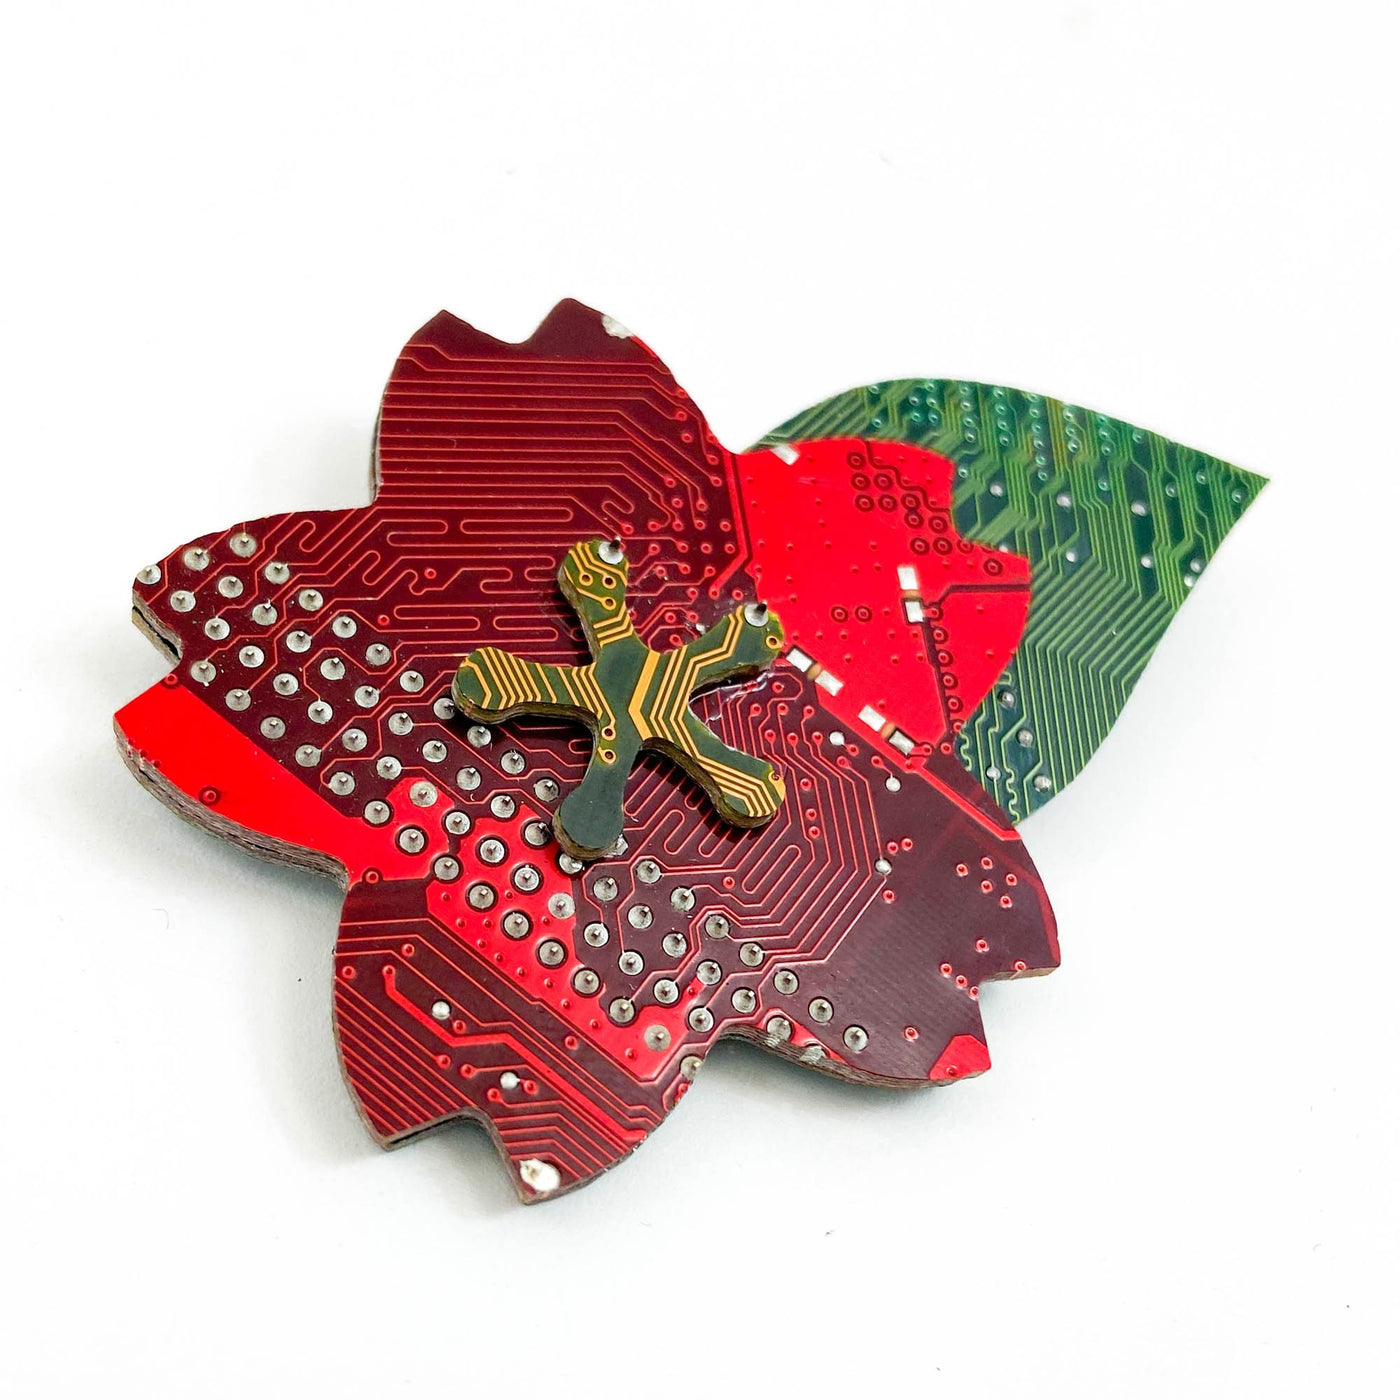 cherry blossom pin handmade from red yellow and green recycled circuit boards